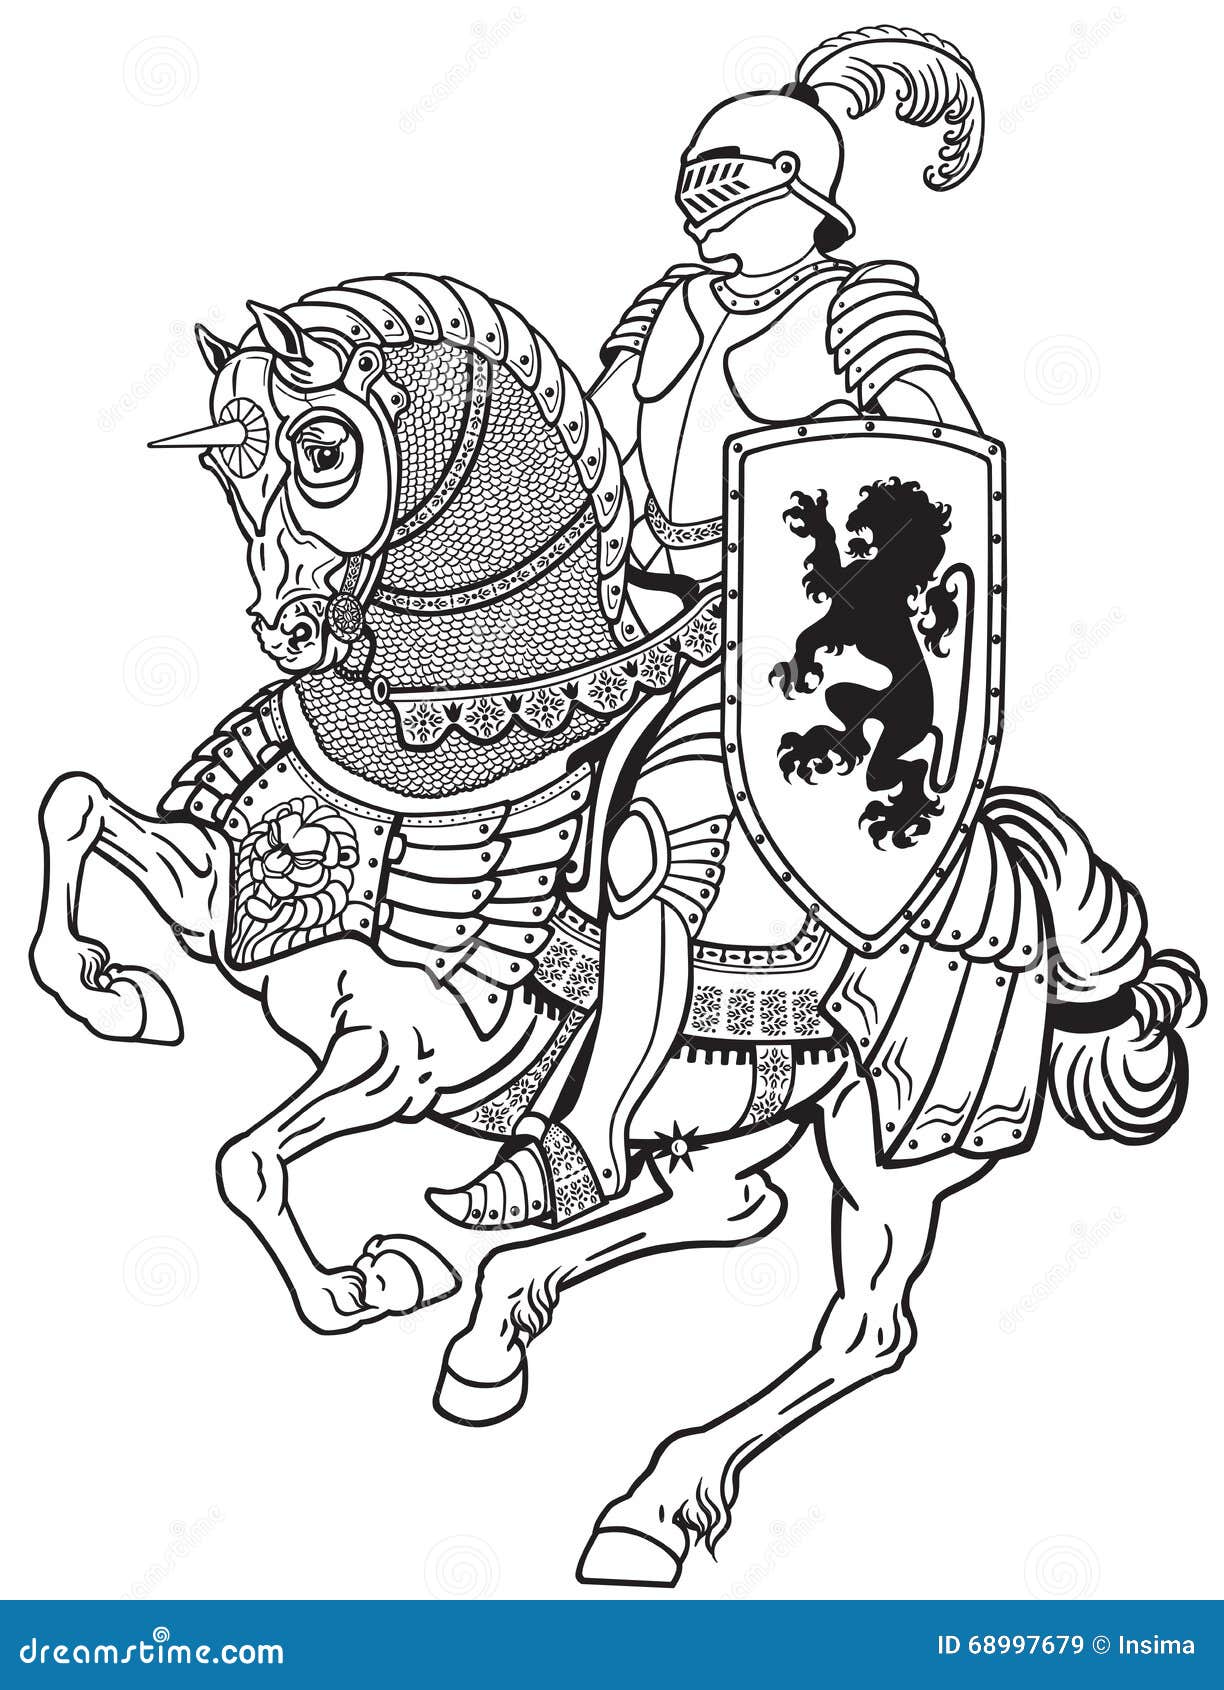 Knight On A Horse Drawing  Knight On Horseback Coloring Page  493x500 PNG  Download  PNGkit